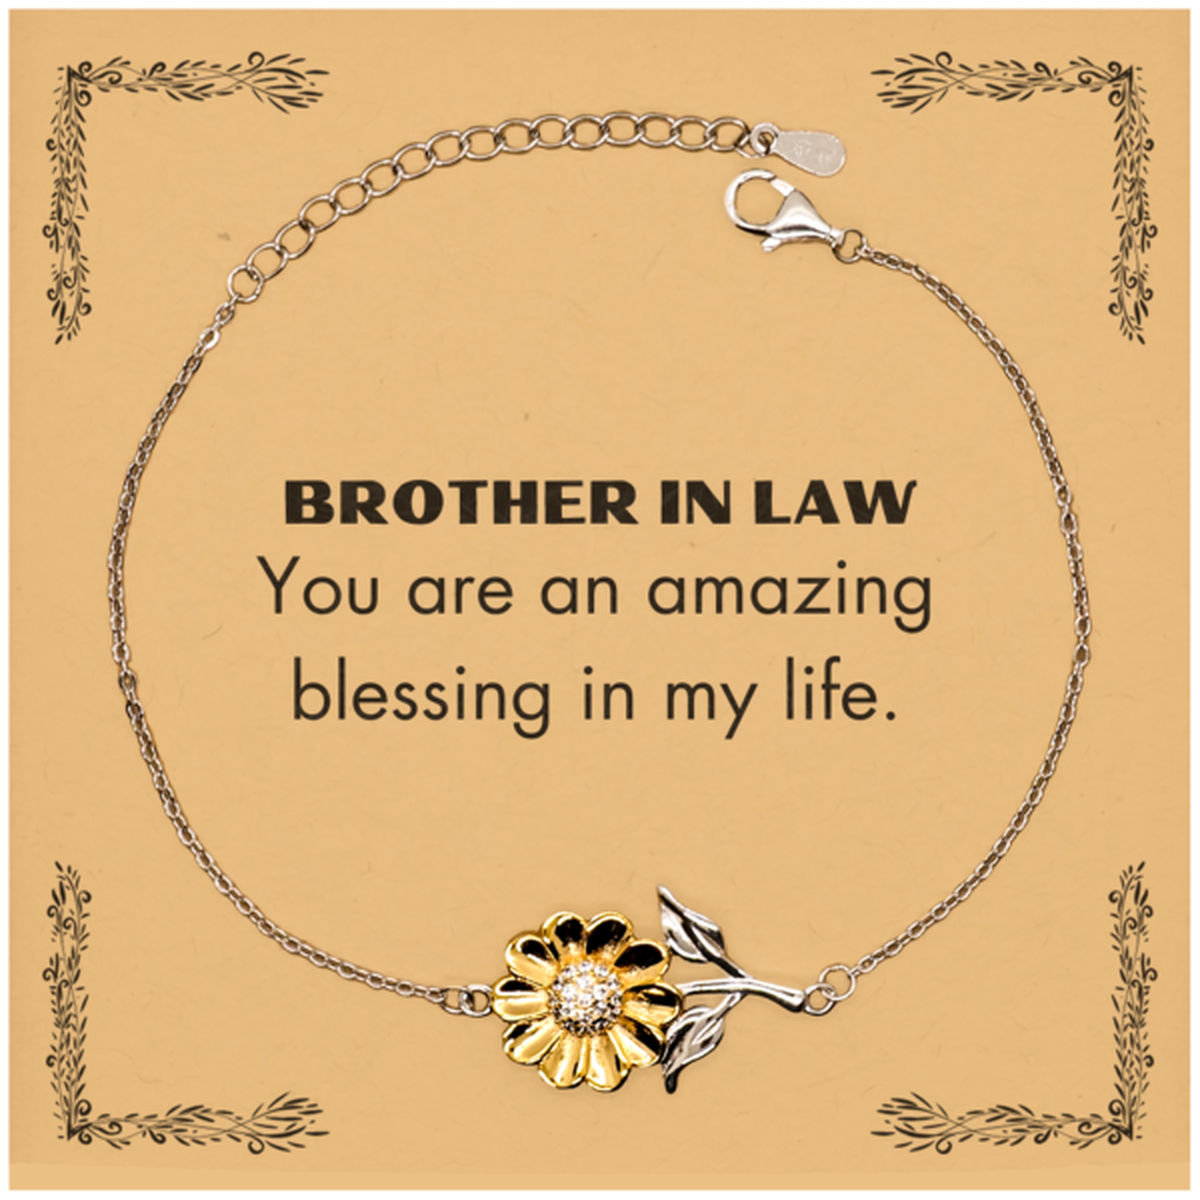 Brother In Law Sunflower Bracelet, You are an amazing blessing in my life, Thank You Gifts For Brother In Law, Inspirational Birthday Christmas Unique Gifts For Brother In Law